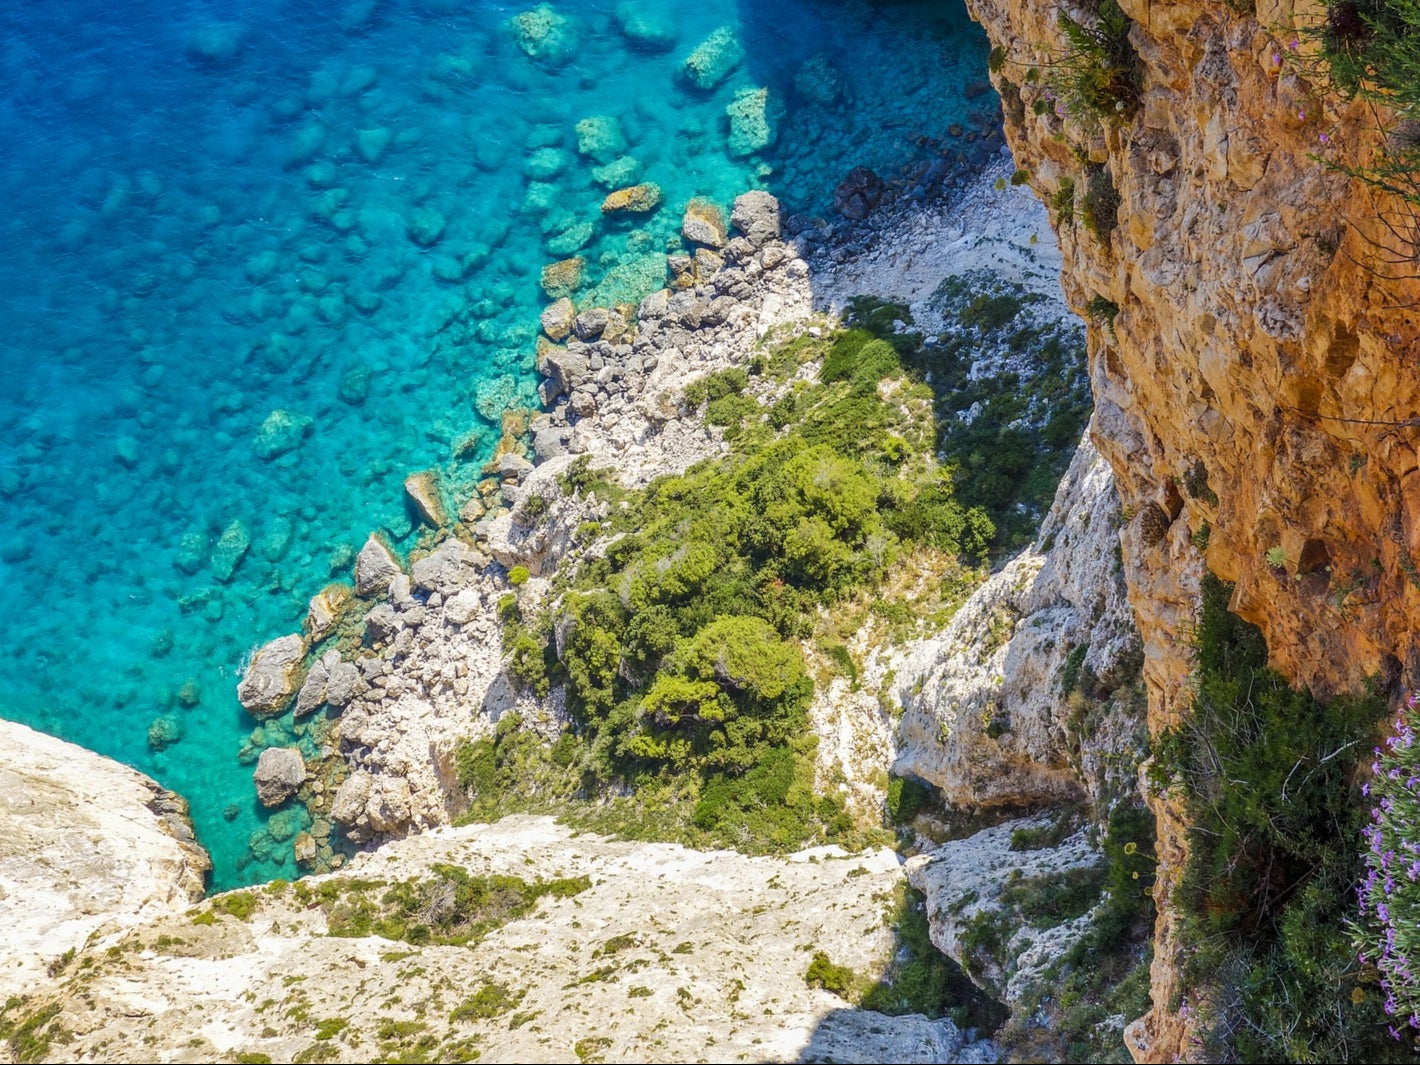 Finding private coves in Zante’s less touristy side